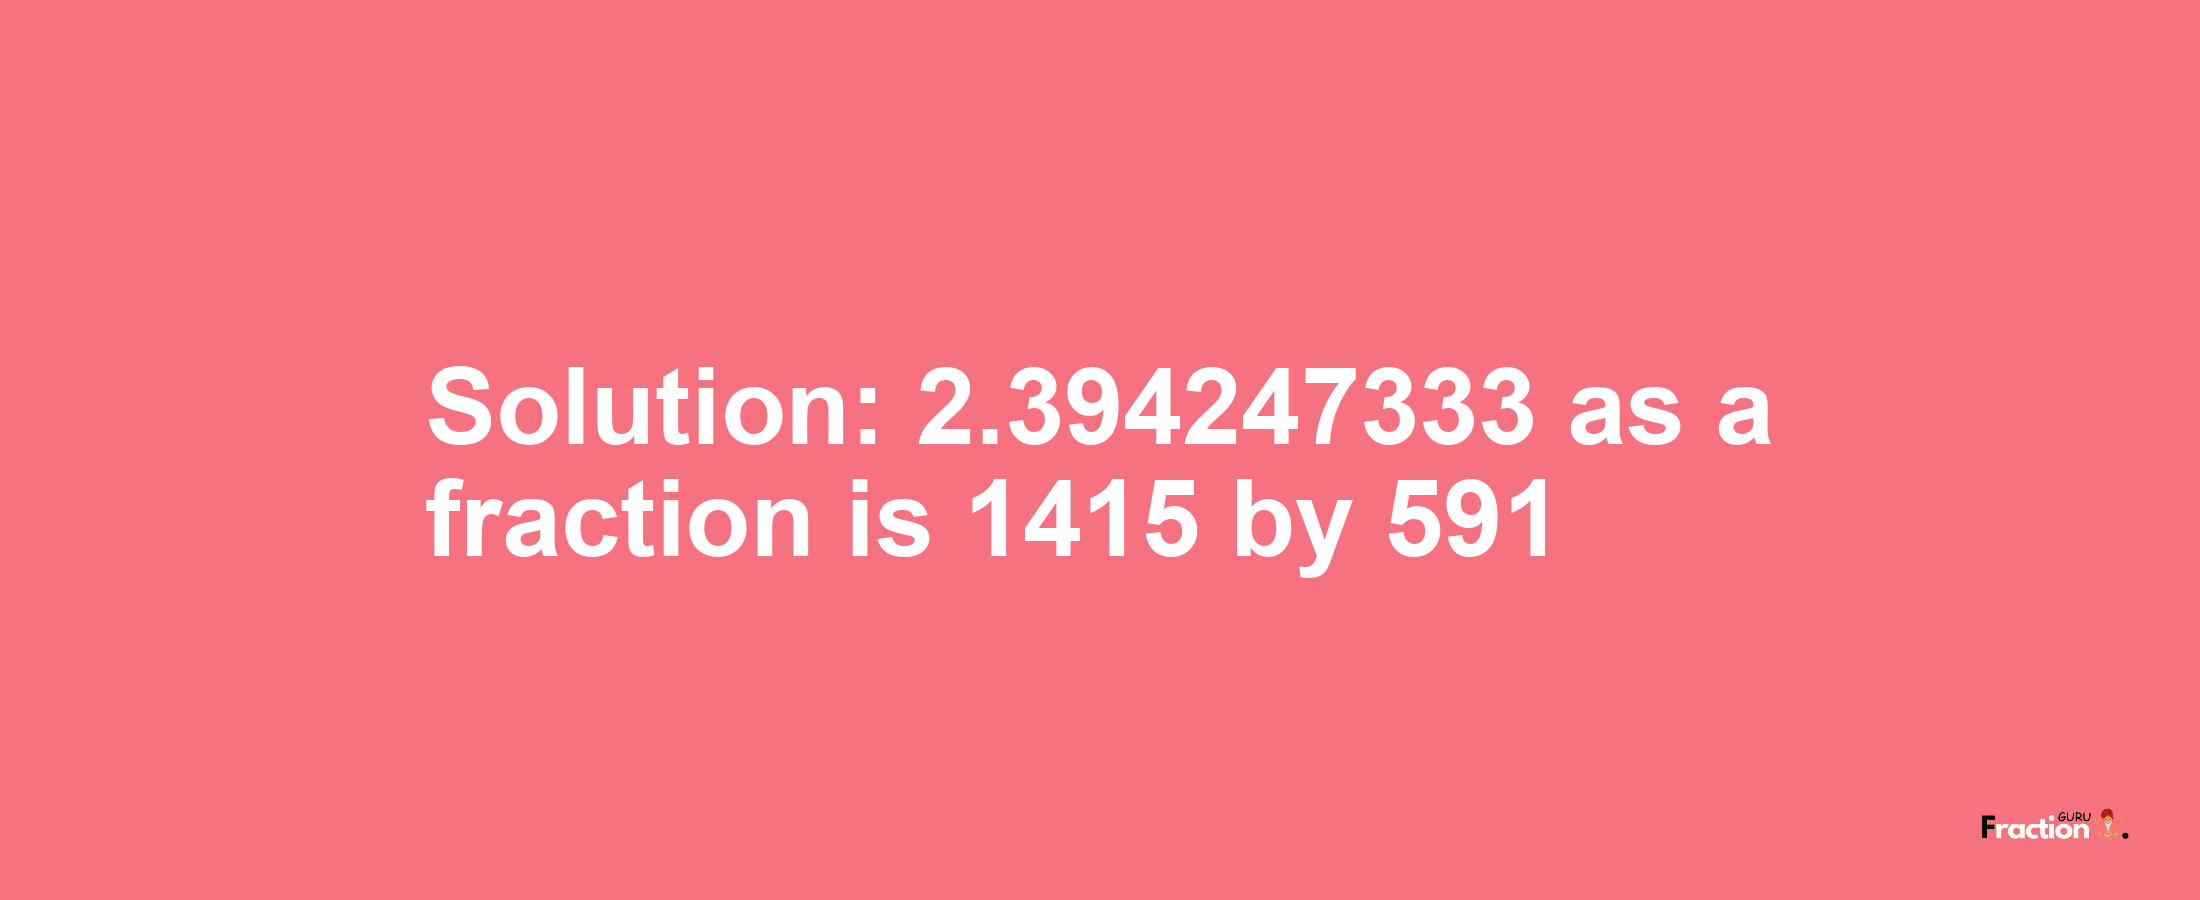 Solution:2.394247333 as a fraction is 1415/591